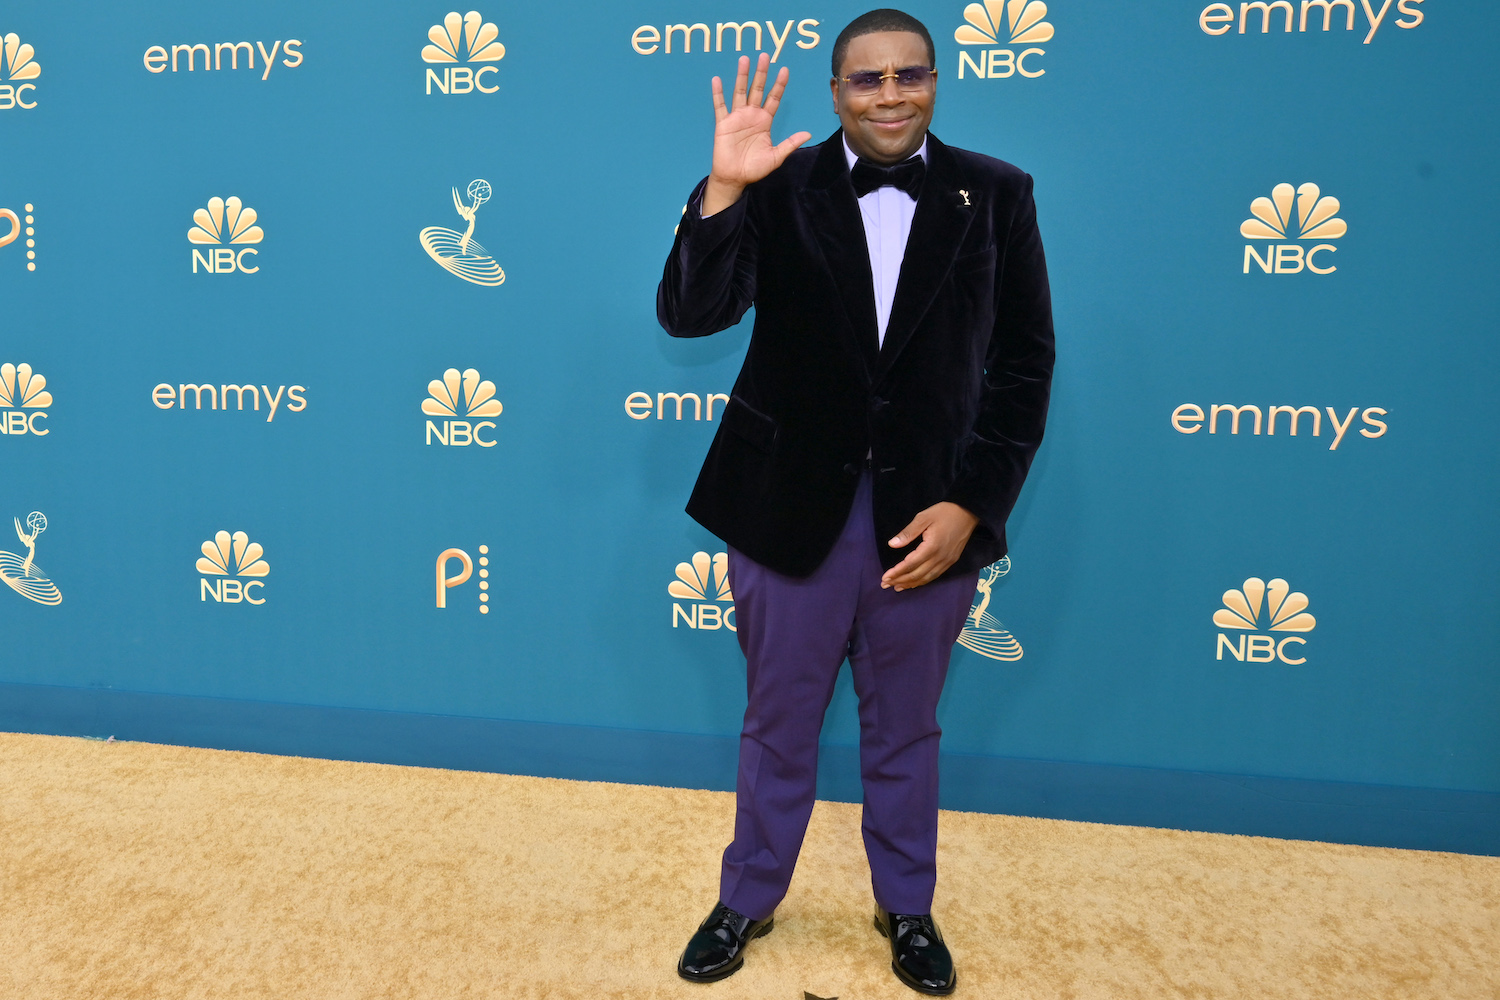 A photo of Kenan Thompson from the 74th annual Emmy Awards